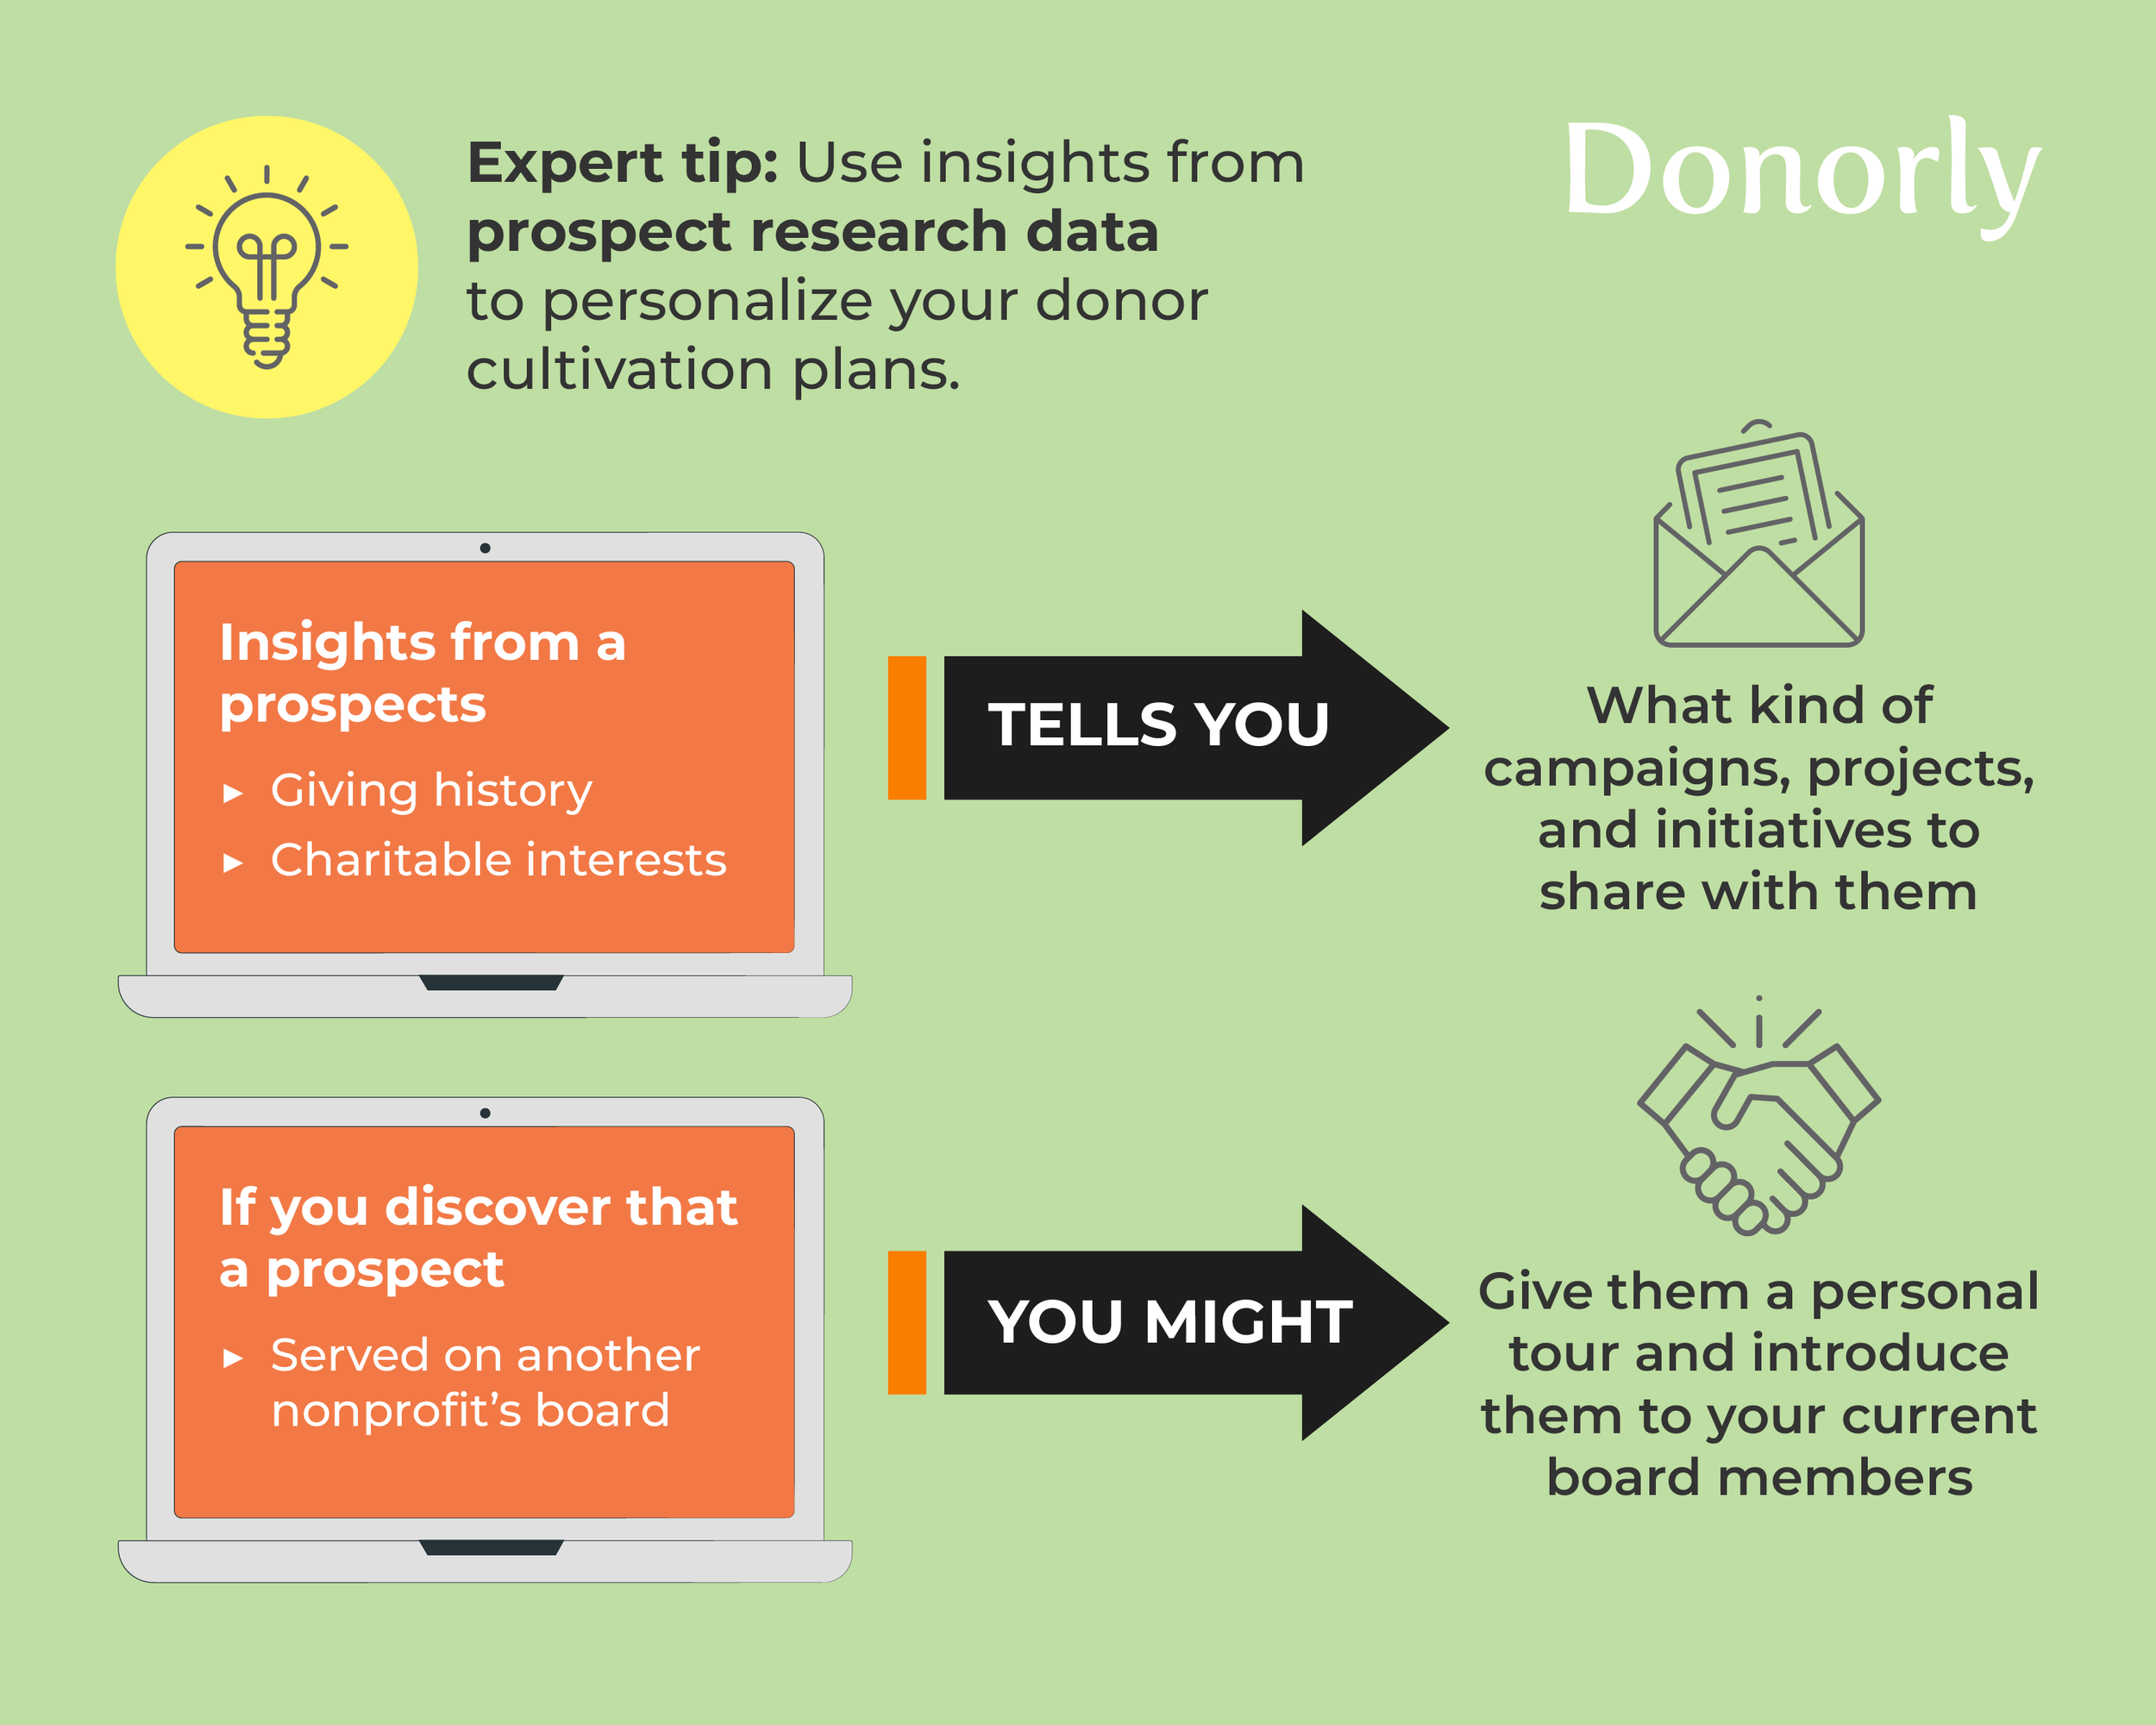 Two examples of using prospect research data to personalize donor cultivation plans, as explained in the text below